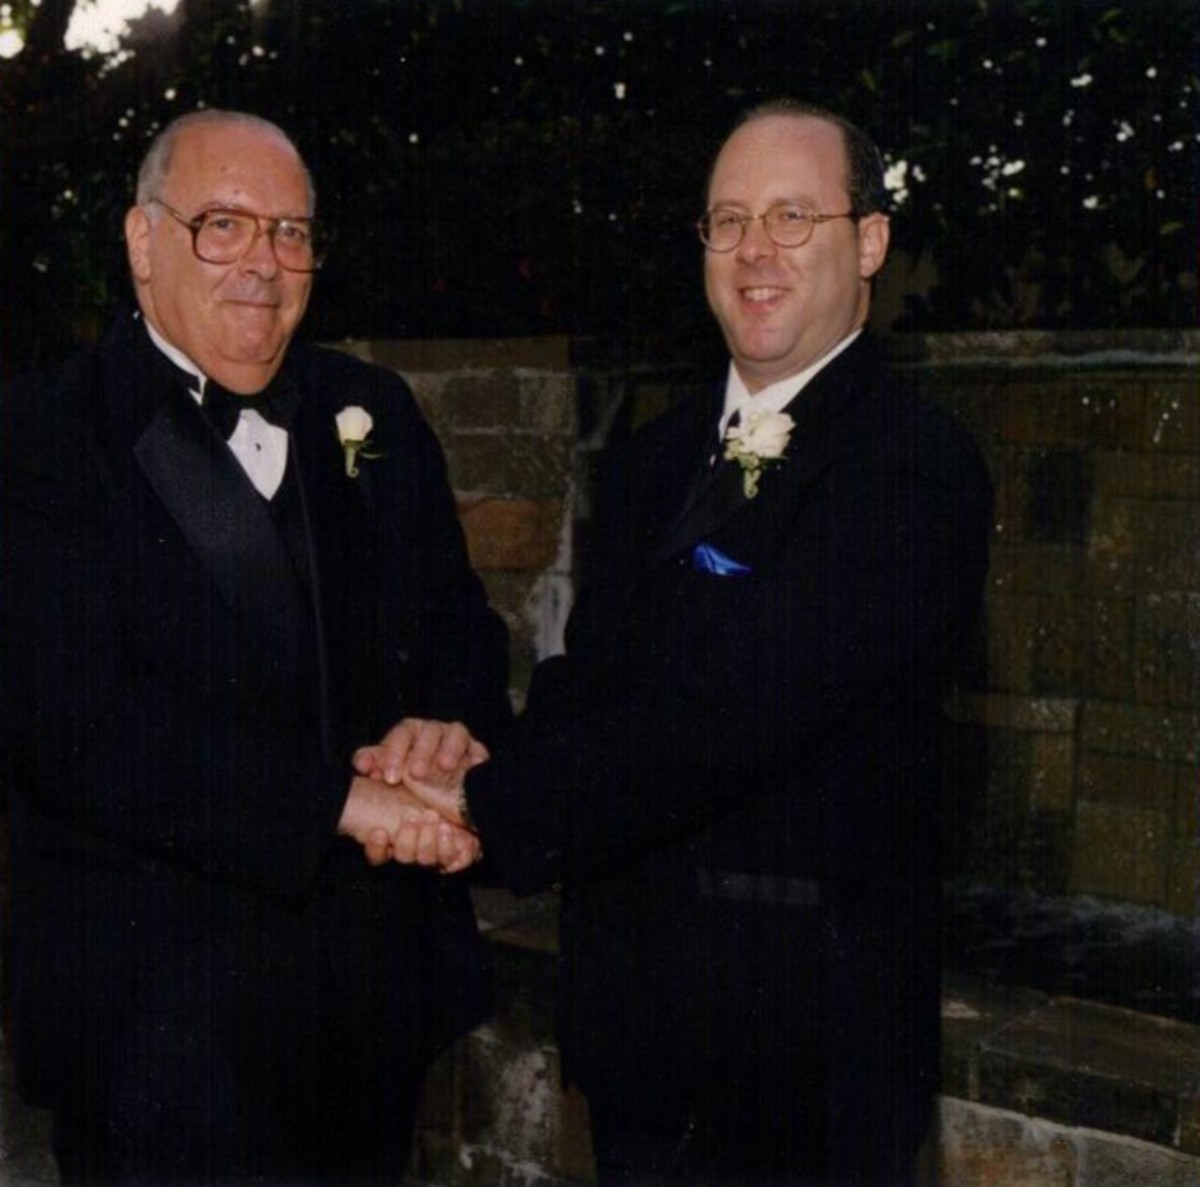 At my wedding, August 26, 2001